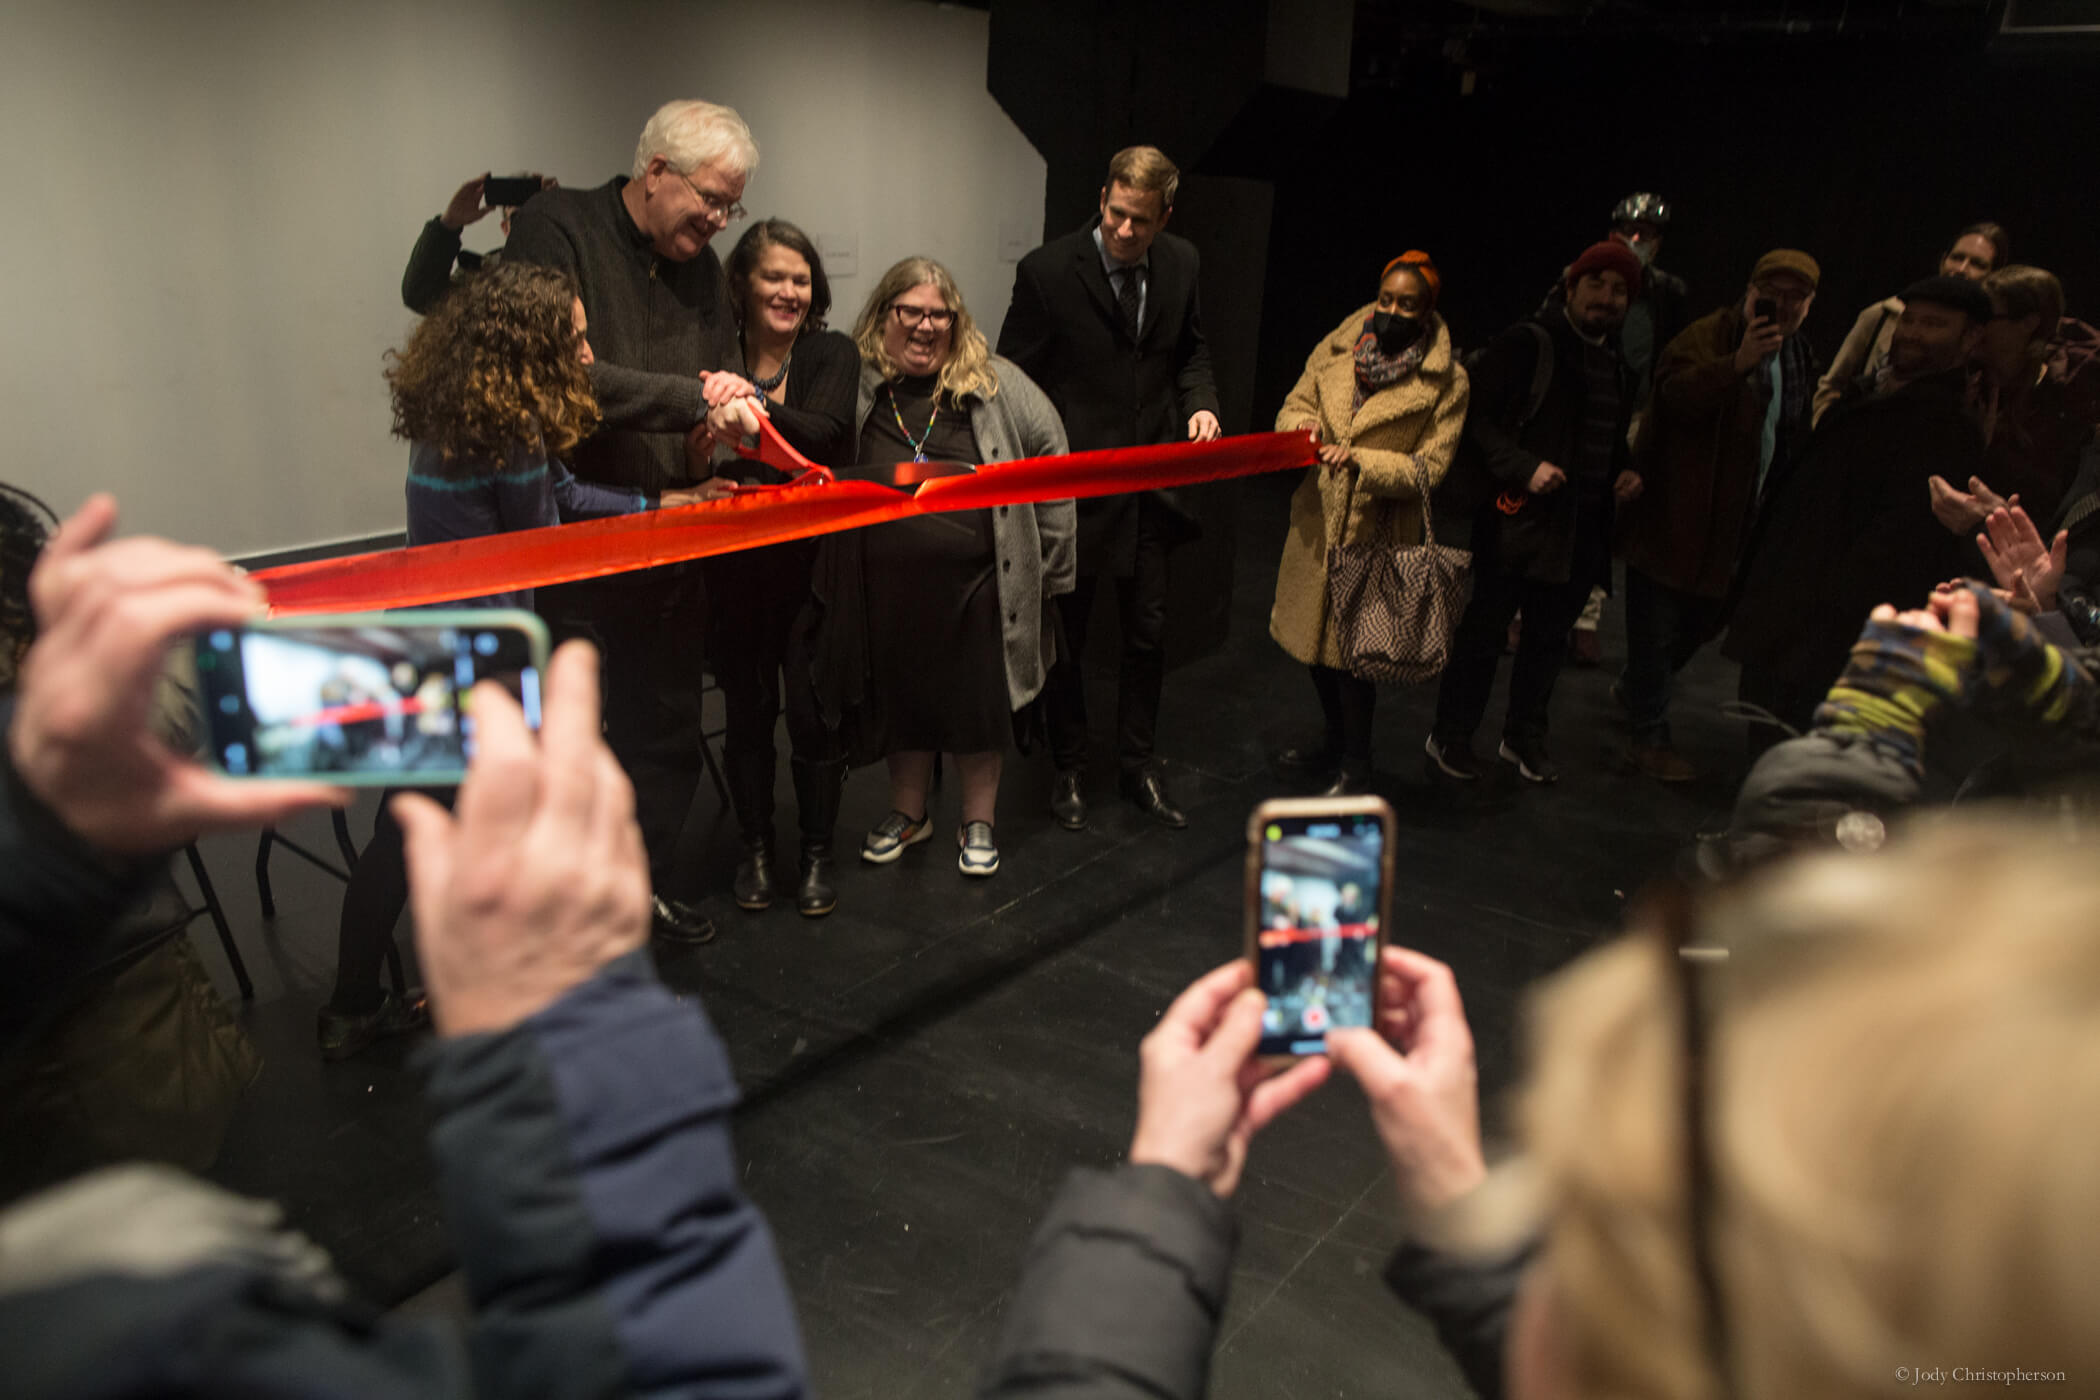 off-broadway rehearsal space ribbon cutting